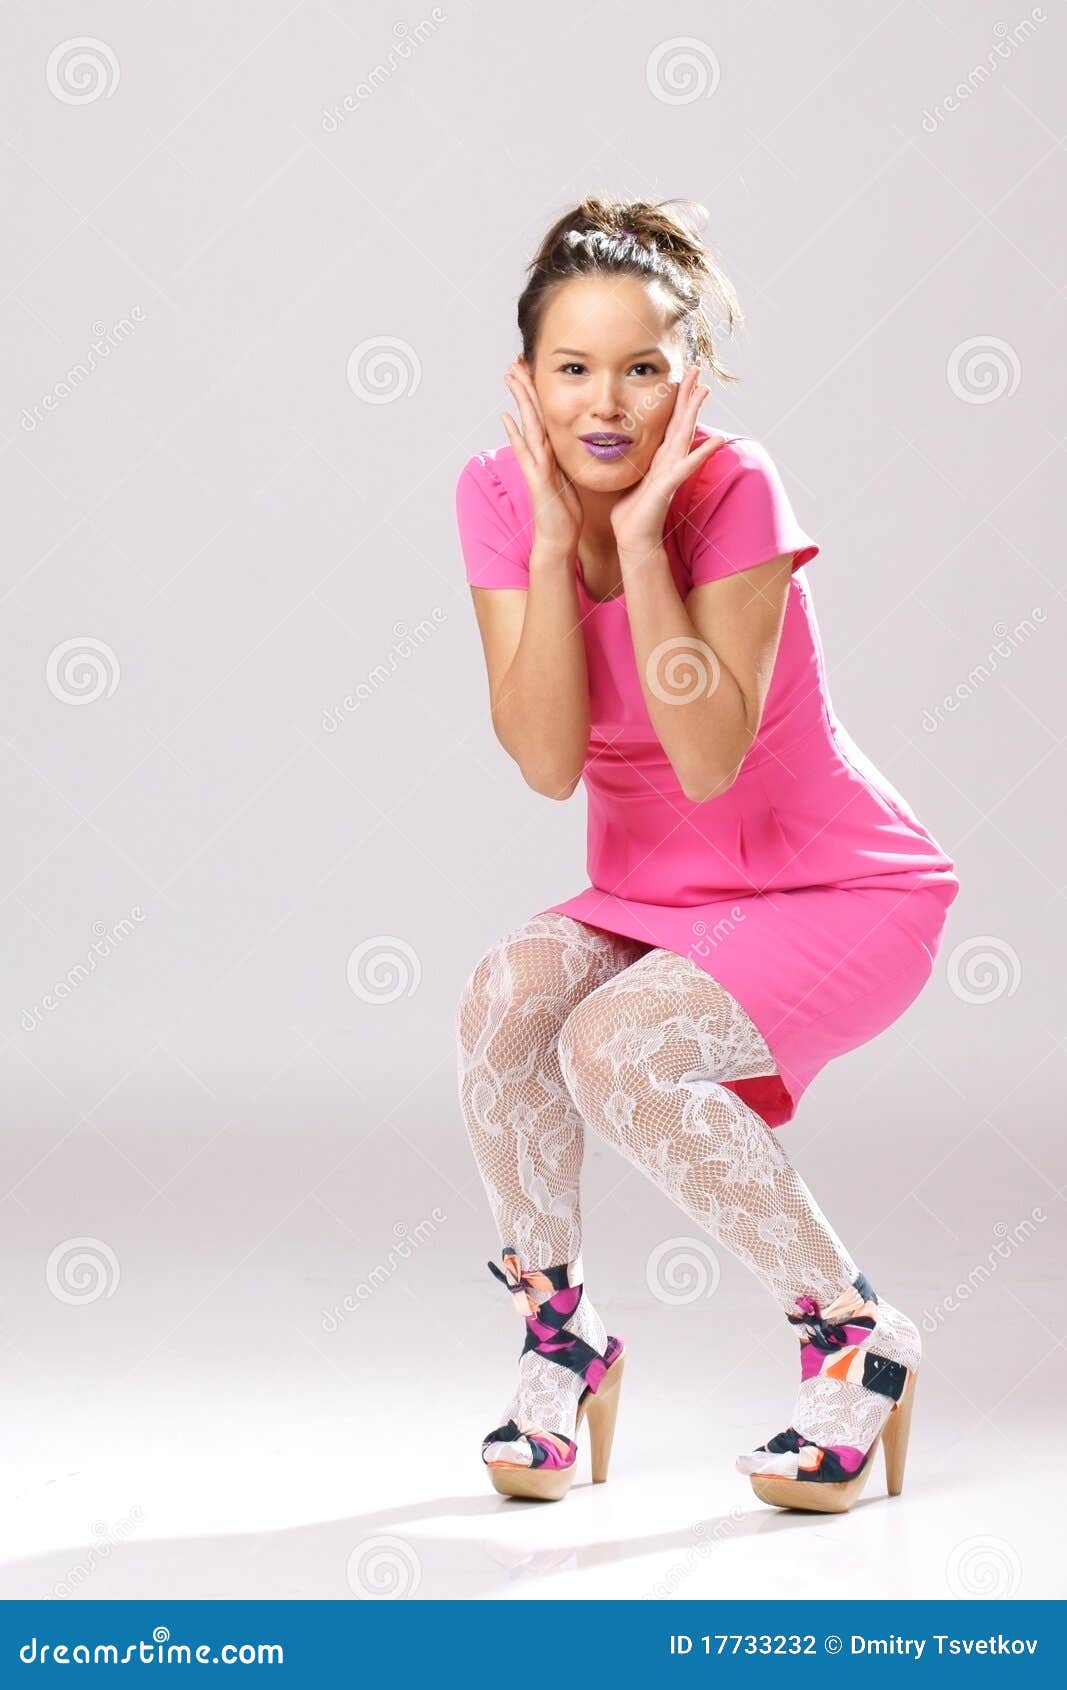 Best School Girl Pin Stock Photos, Pictures & Royalty-Free 